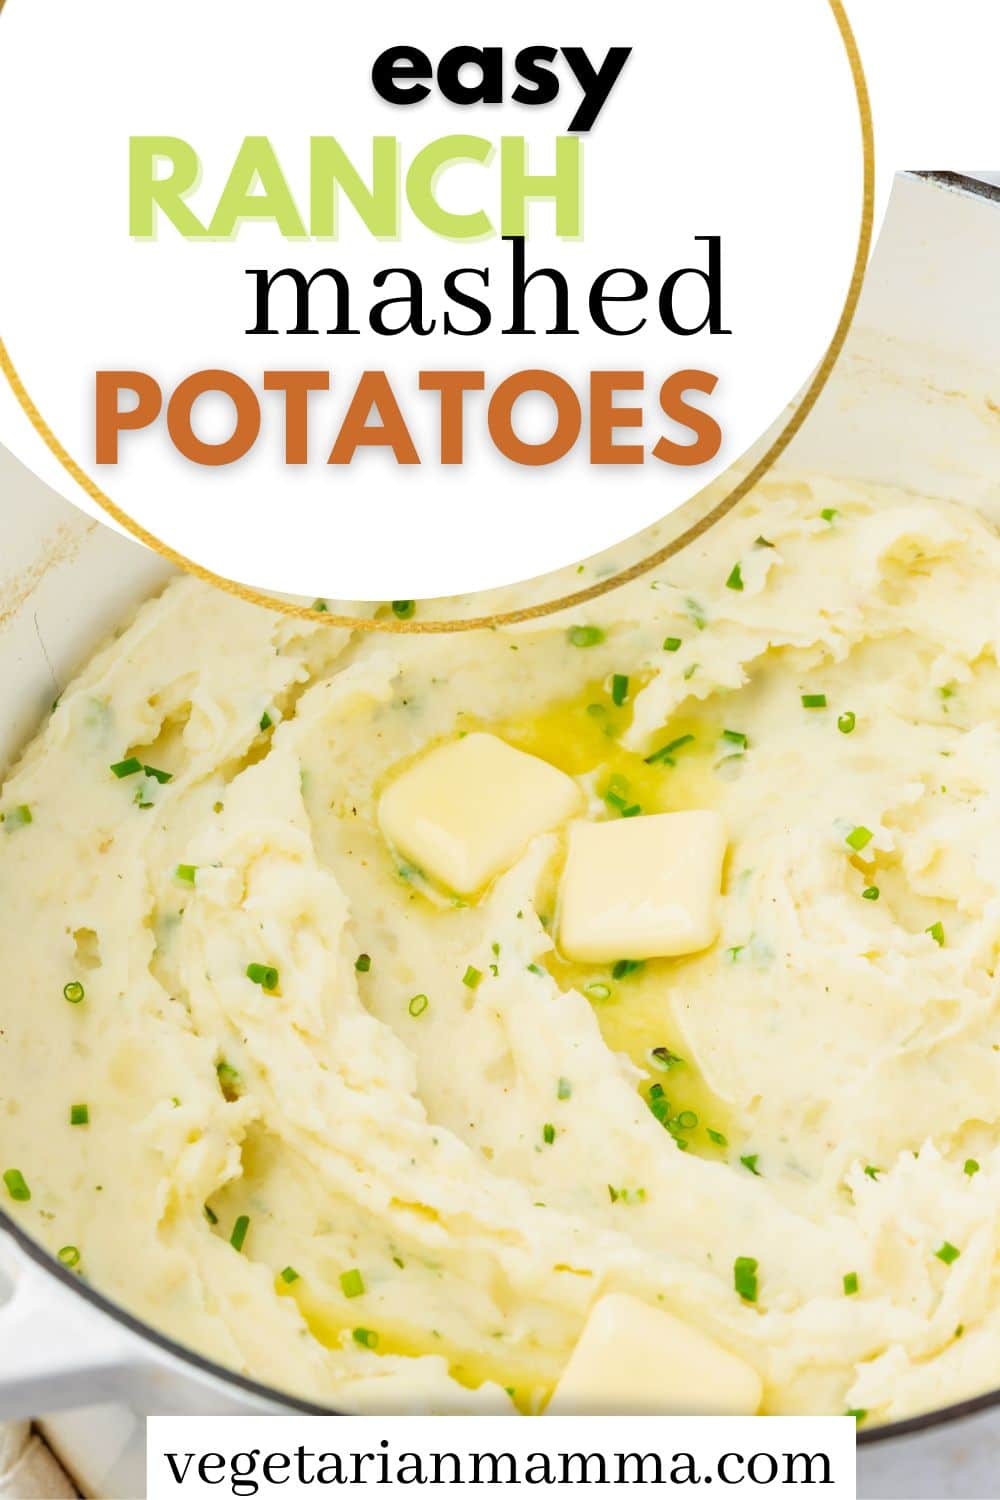 Rich, creamy, and buttery Ranch Mashed Potatoes are perfectly seasoned with the help of prepared ranch seasoning!